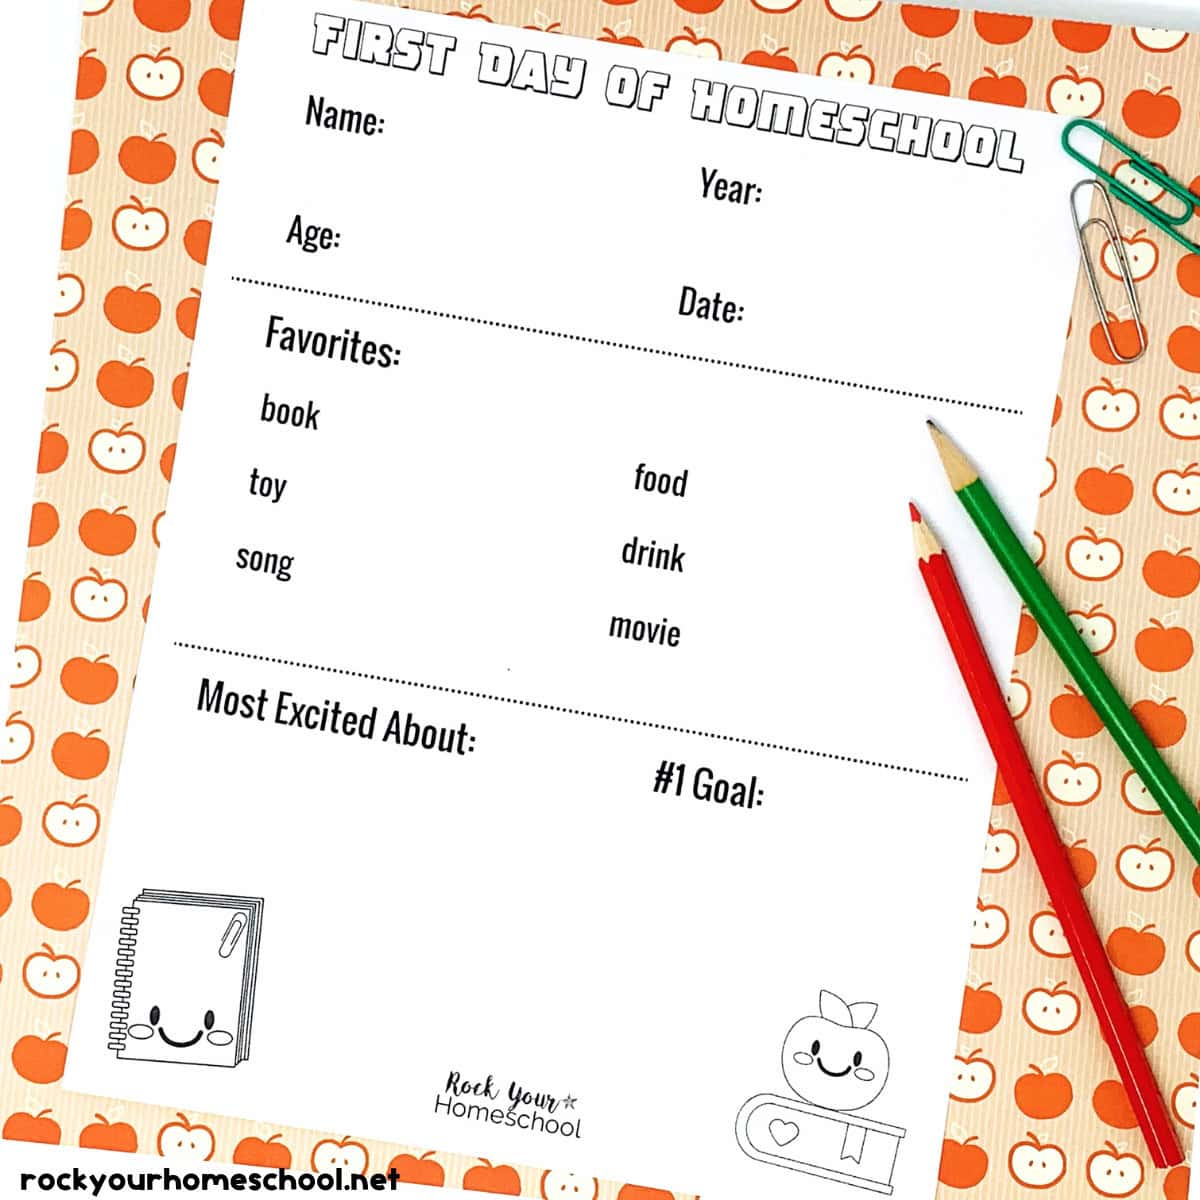 Example of first day of homeschool printable worksheets with paperclips, red and green color pencils, and apple-themed paper.